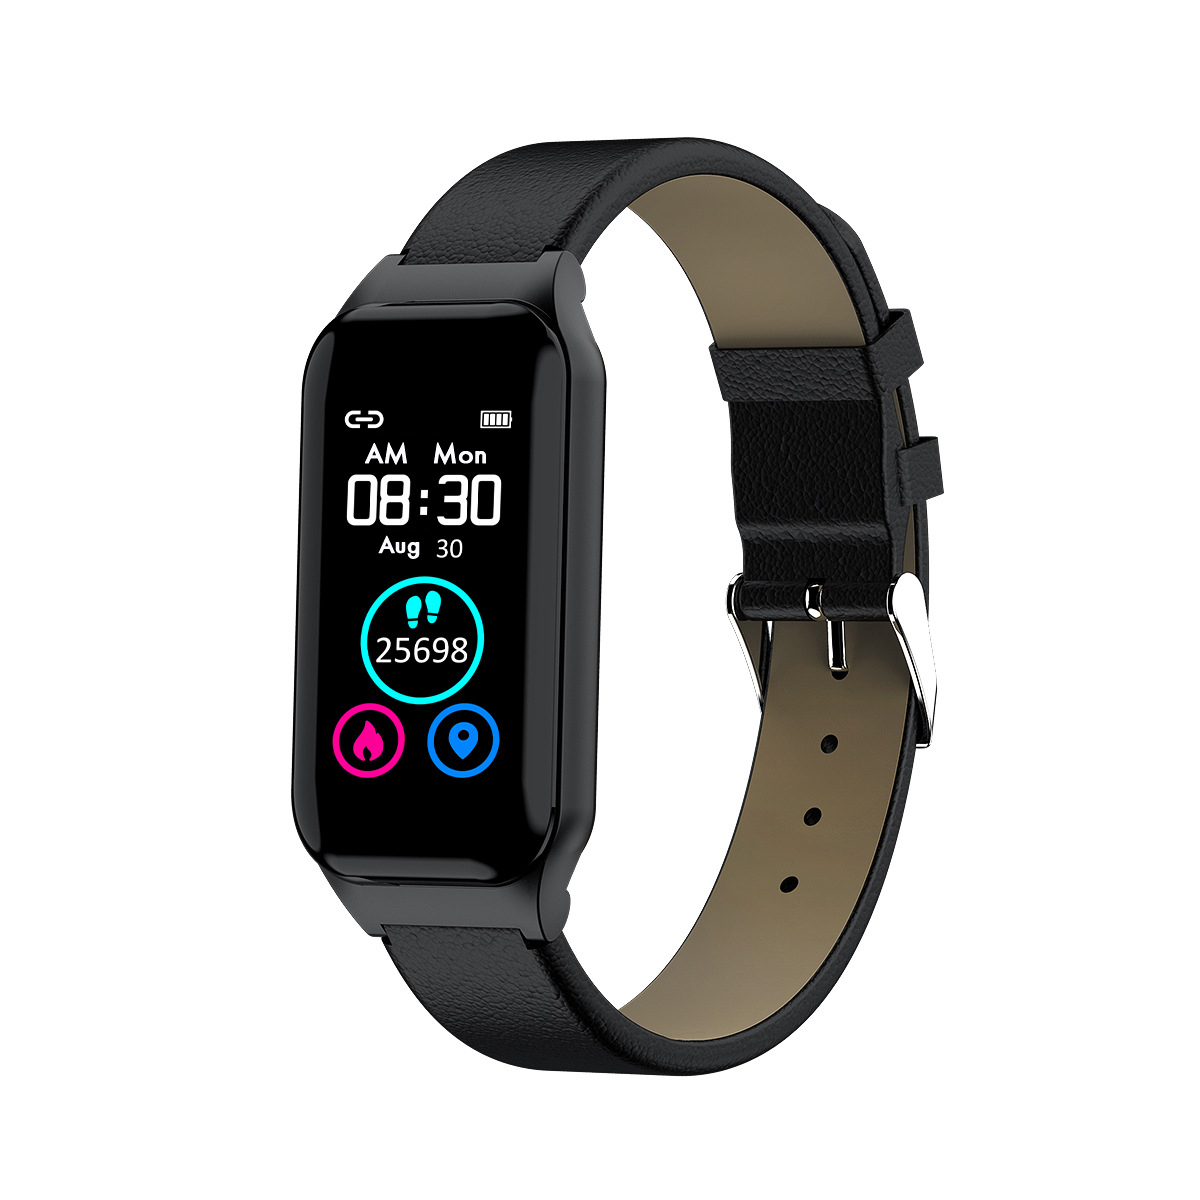 Find bluetooth 5 0 Bakeey X89 Wireless bluetooth Earphone Wristband Real Time Heart Rate Blood Pressure Monitor Smart Watch for Sale on Gipsybee.com with cryptocurrencies